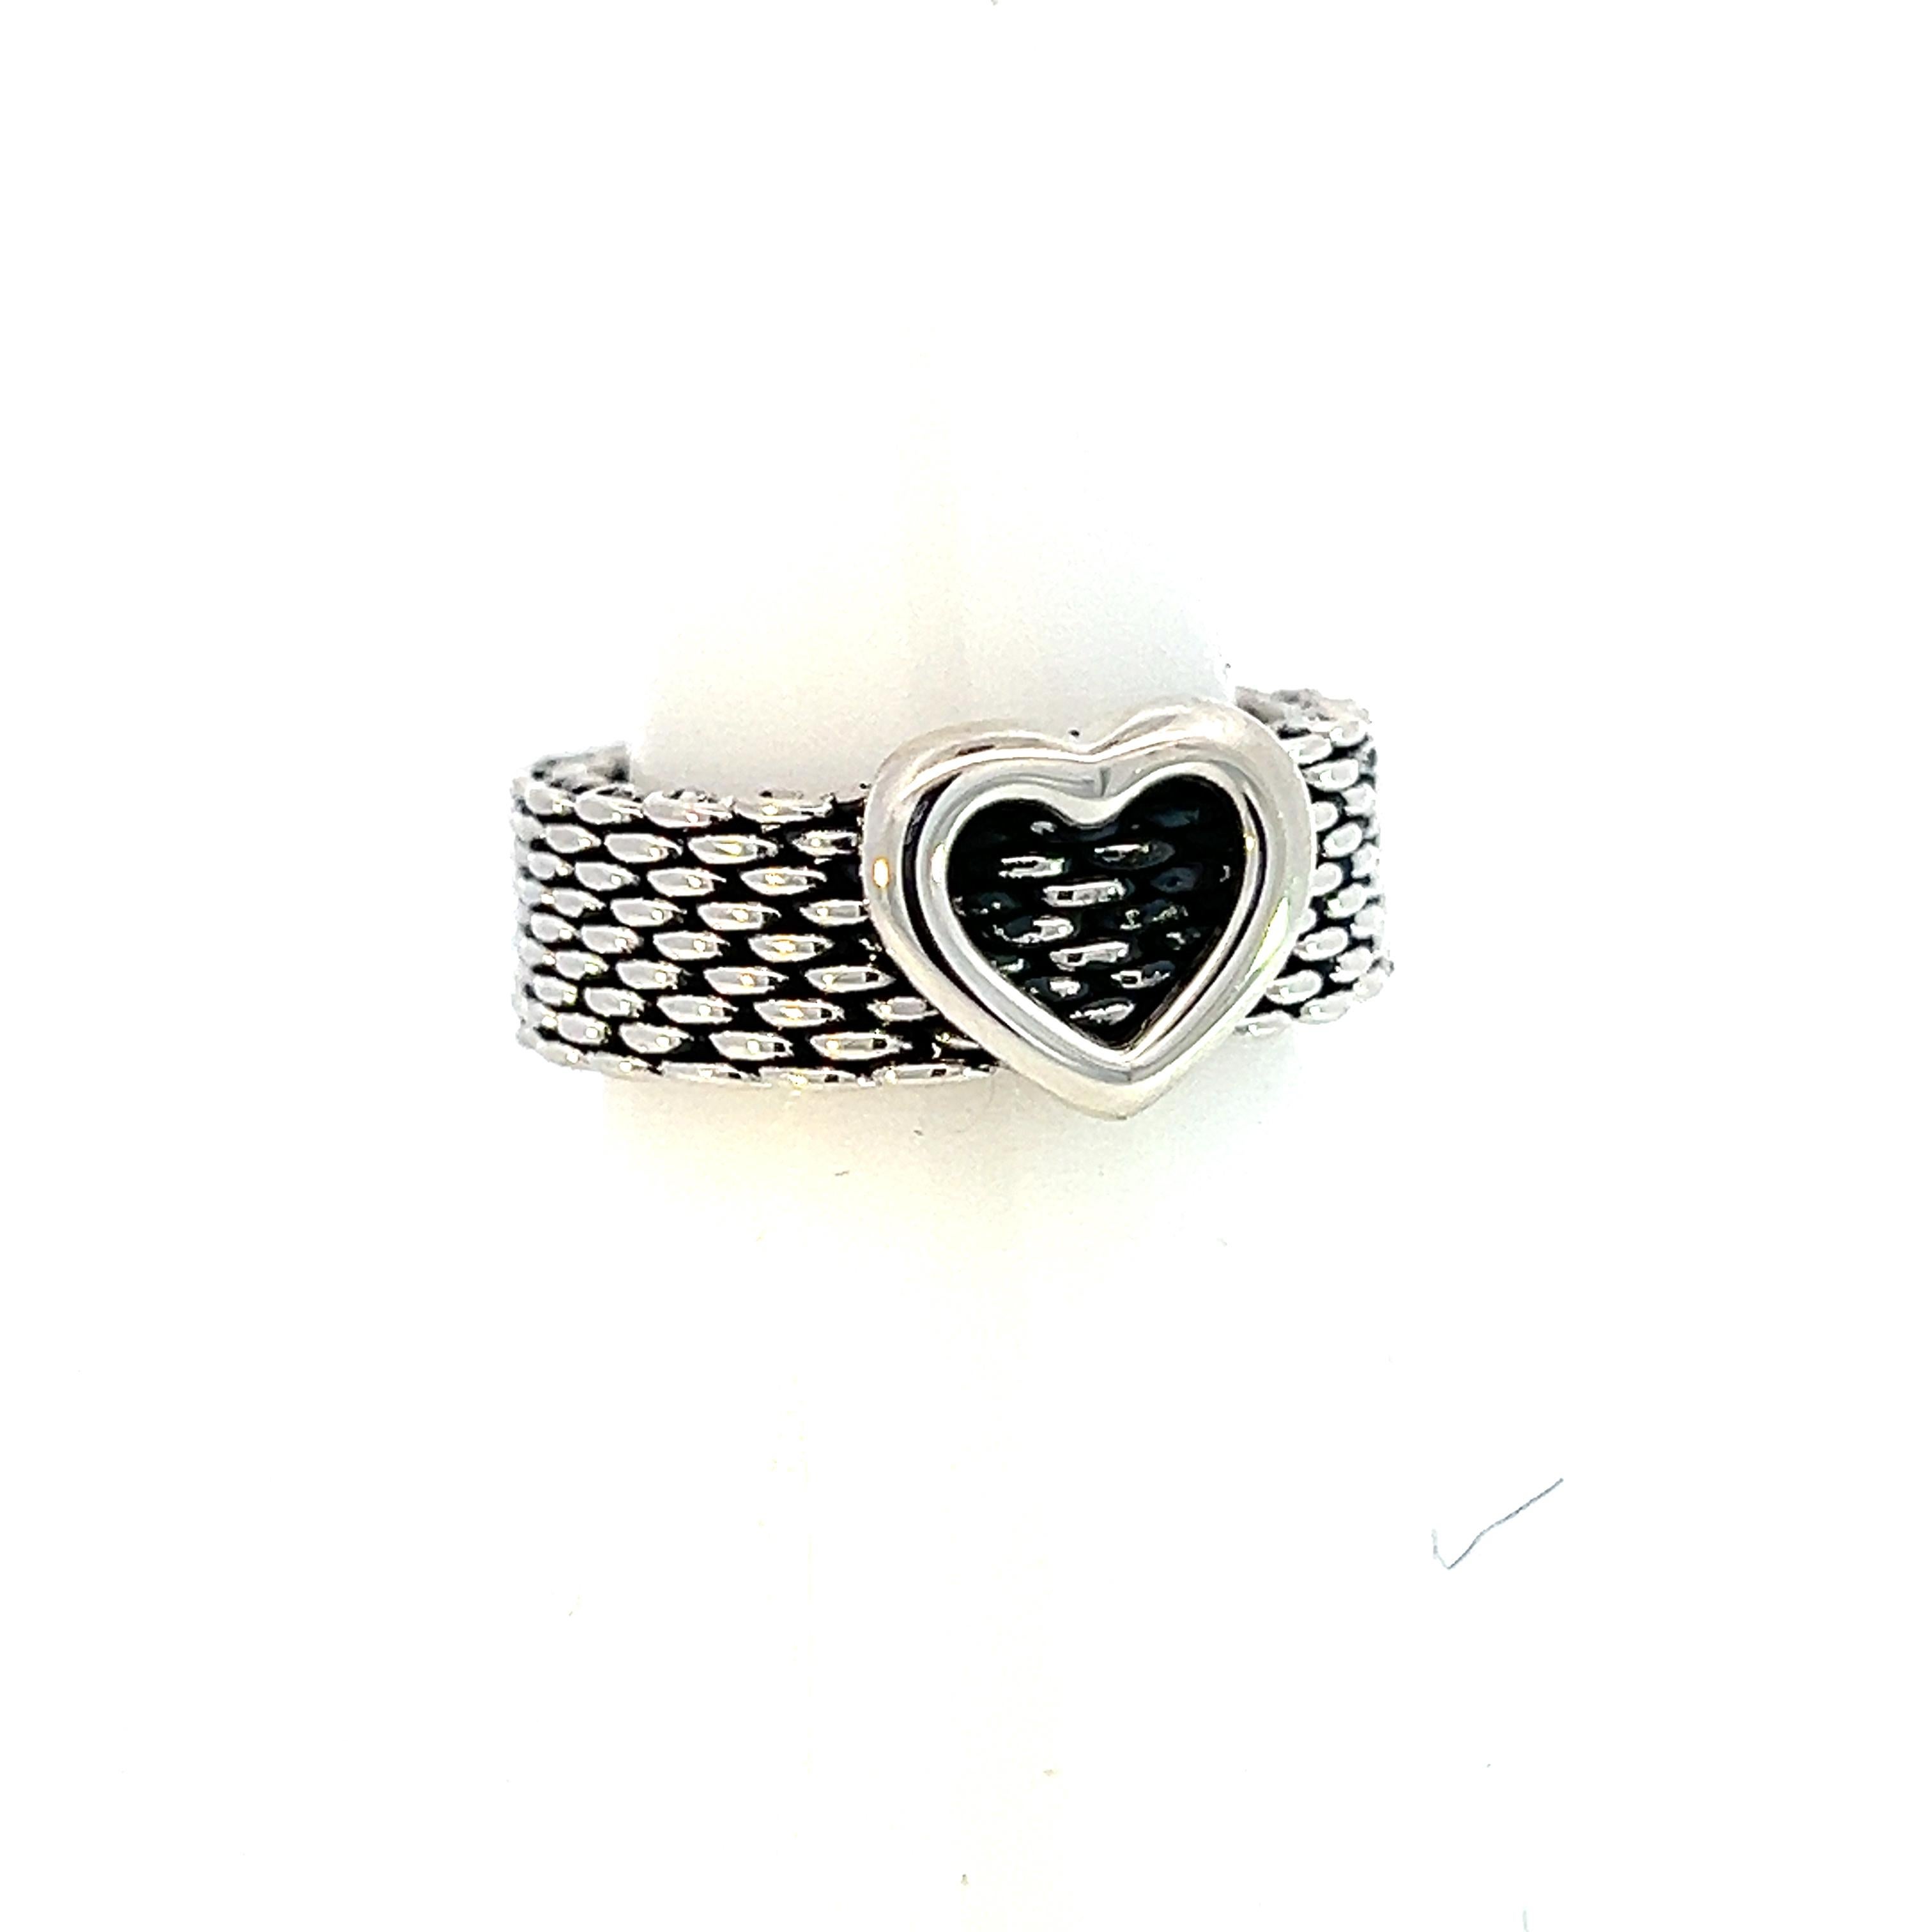 Authentic Tiffany & Co Estate Somerset Heart Ring 5.5 Silver 6.30 mm TIF608

This elegant Authentic Tiffany & Co ring is made of sterling silver and has a weight of 7.60 grams.

TRUSTED SELLER SINCE 2002

PLEASE SEE OUR HUNDREDS OF POSITIVE